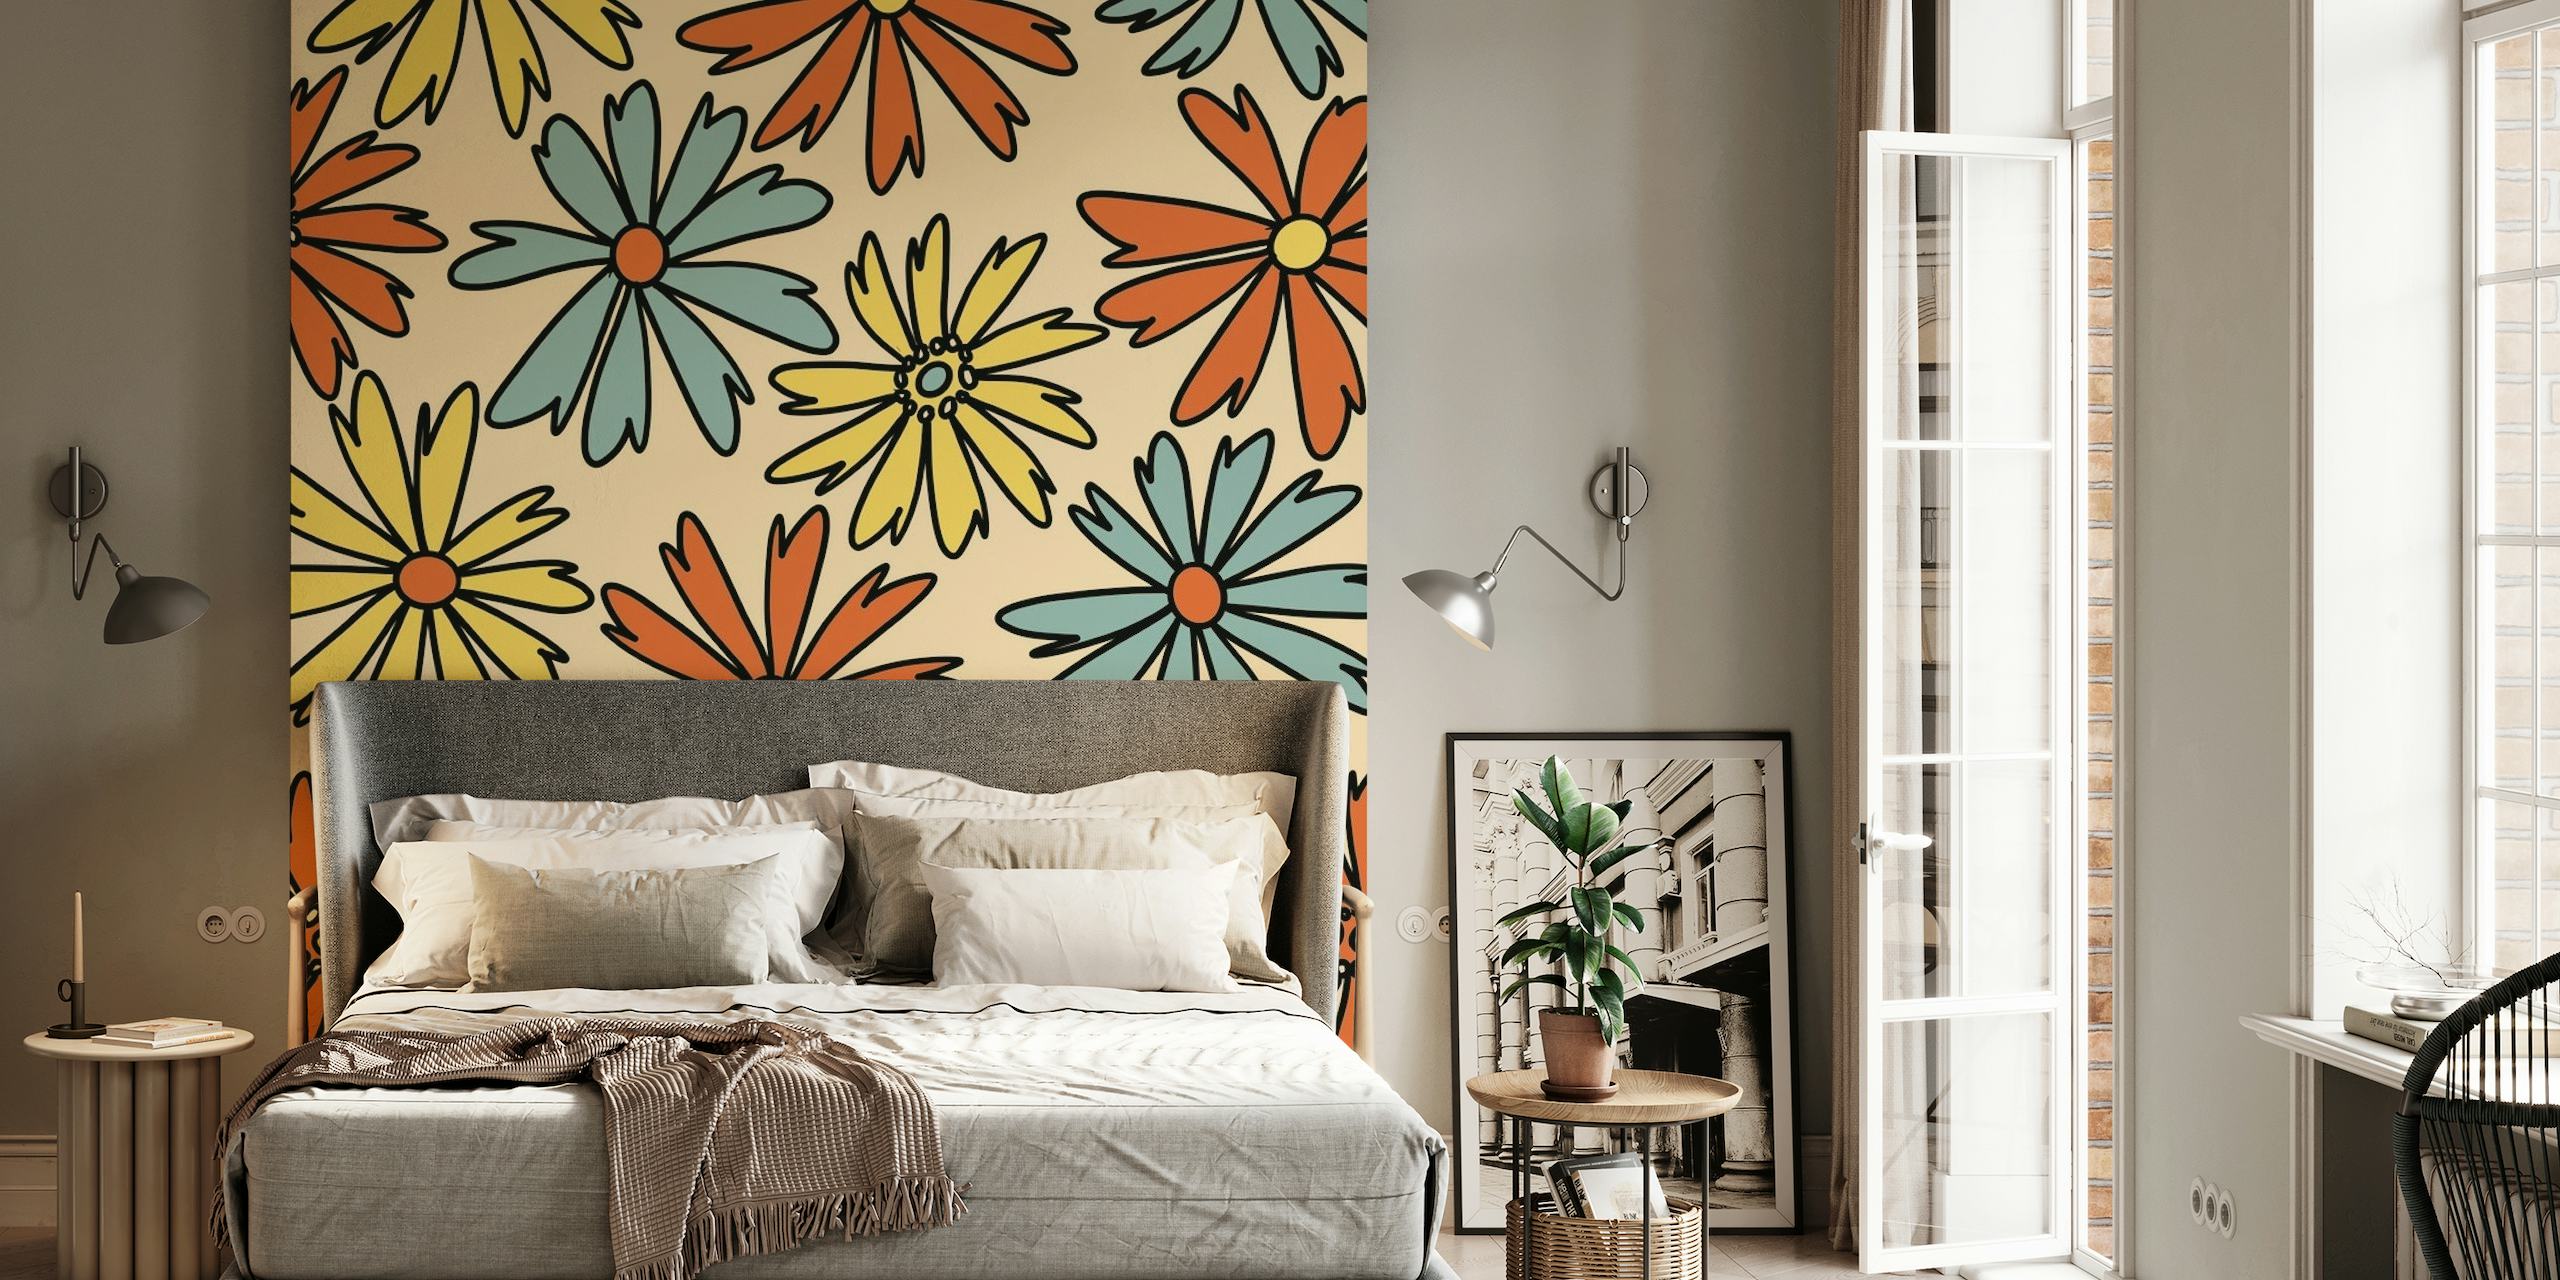 Stylized cosmea flowers in yellow, blue, and orange on a cream background wall mural